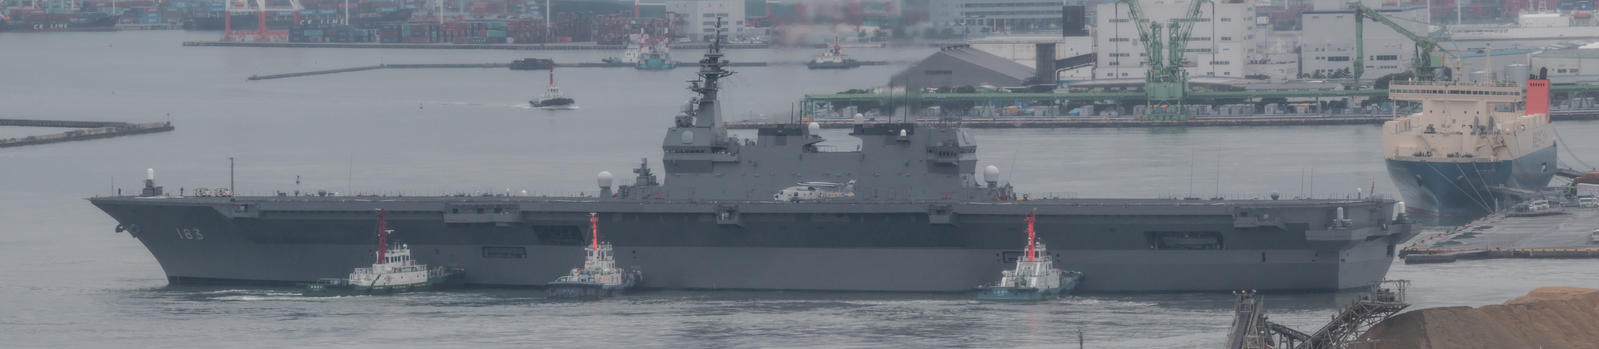 Ship panorama helicopter destroyer  Izumo